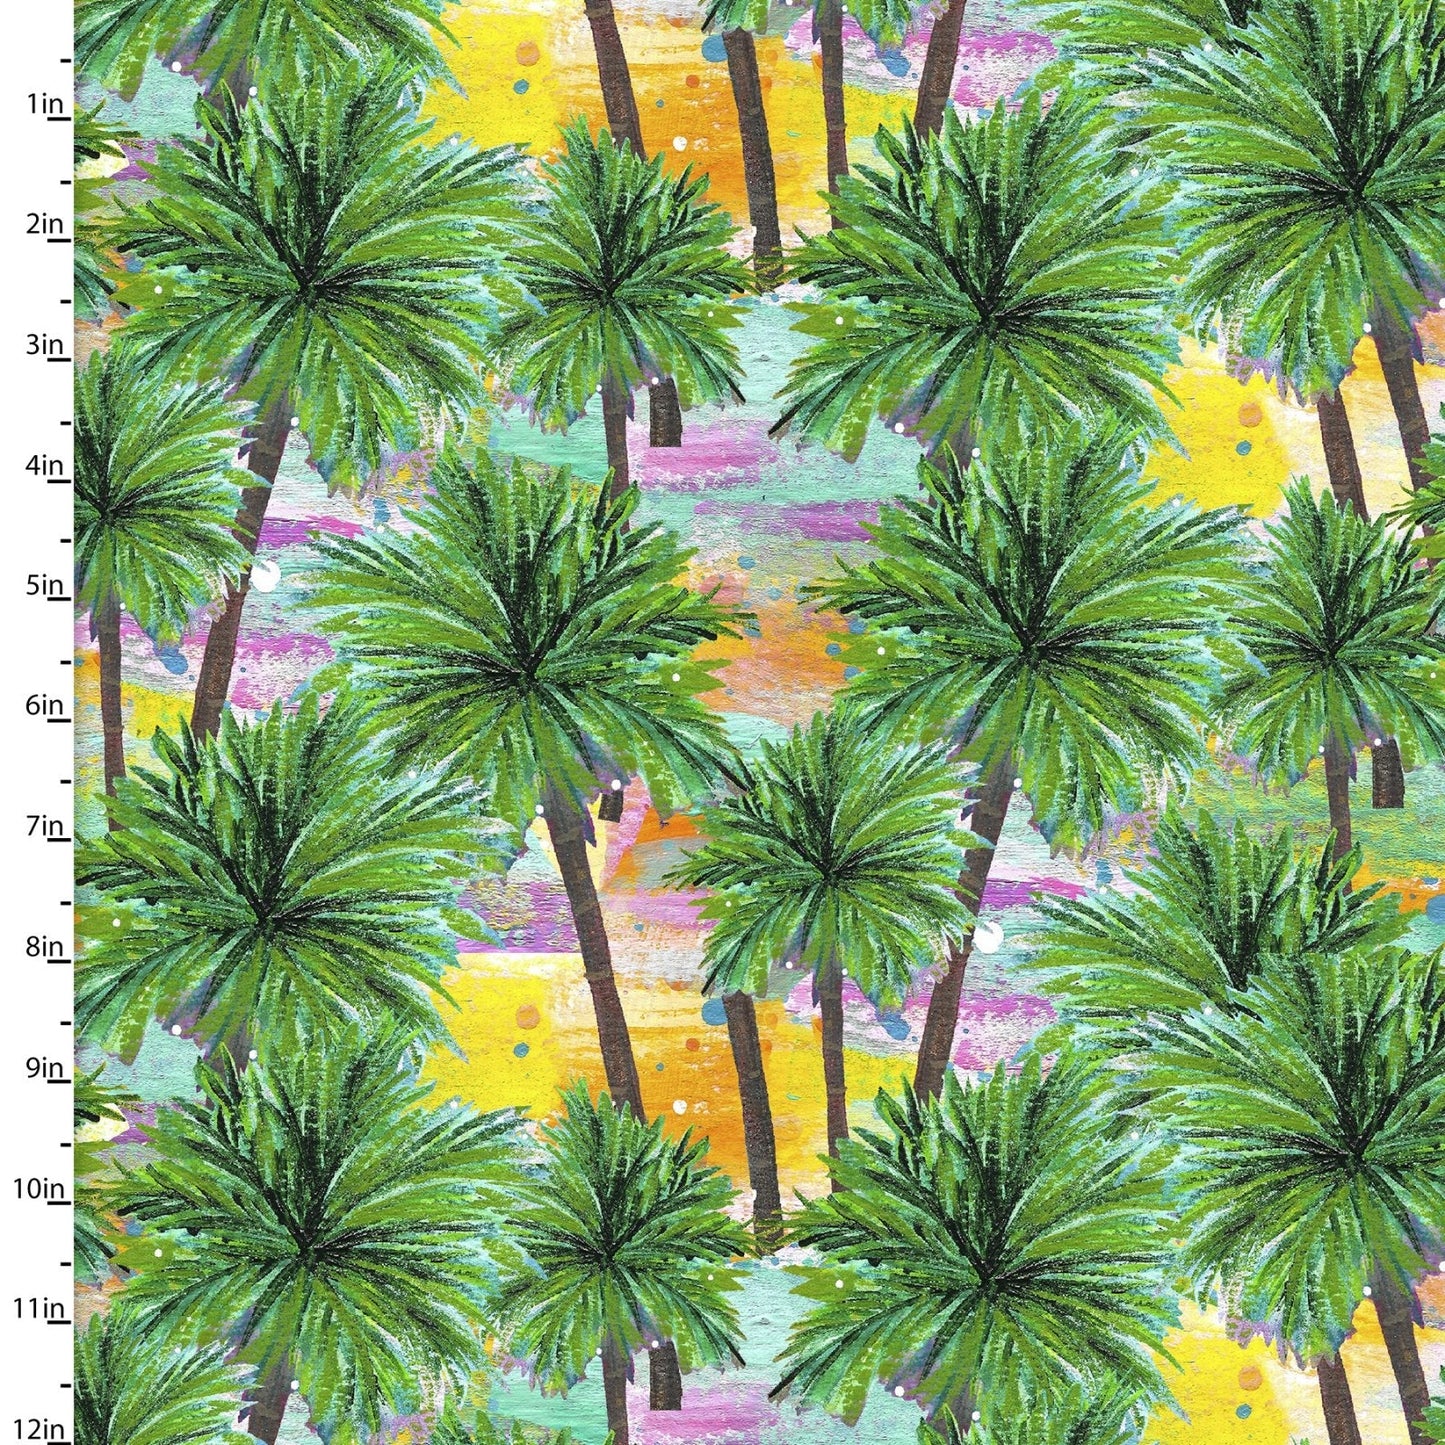 3 Wishes Fabric Green Palms Fabric from Seas The Day by 3 Wishes Fabric by Bethany Joy